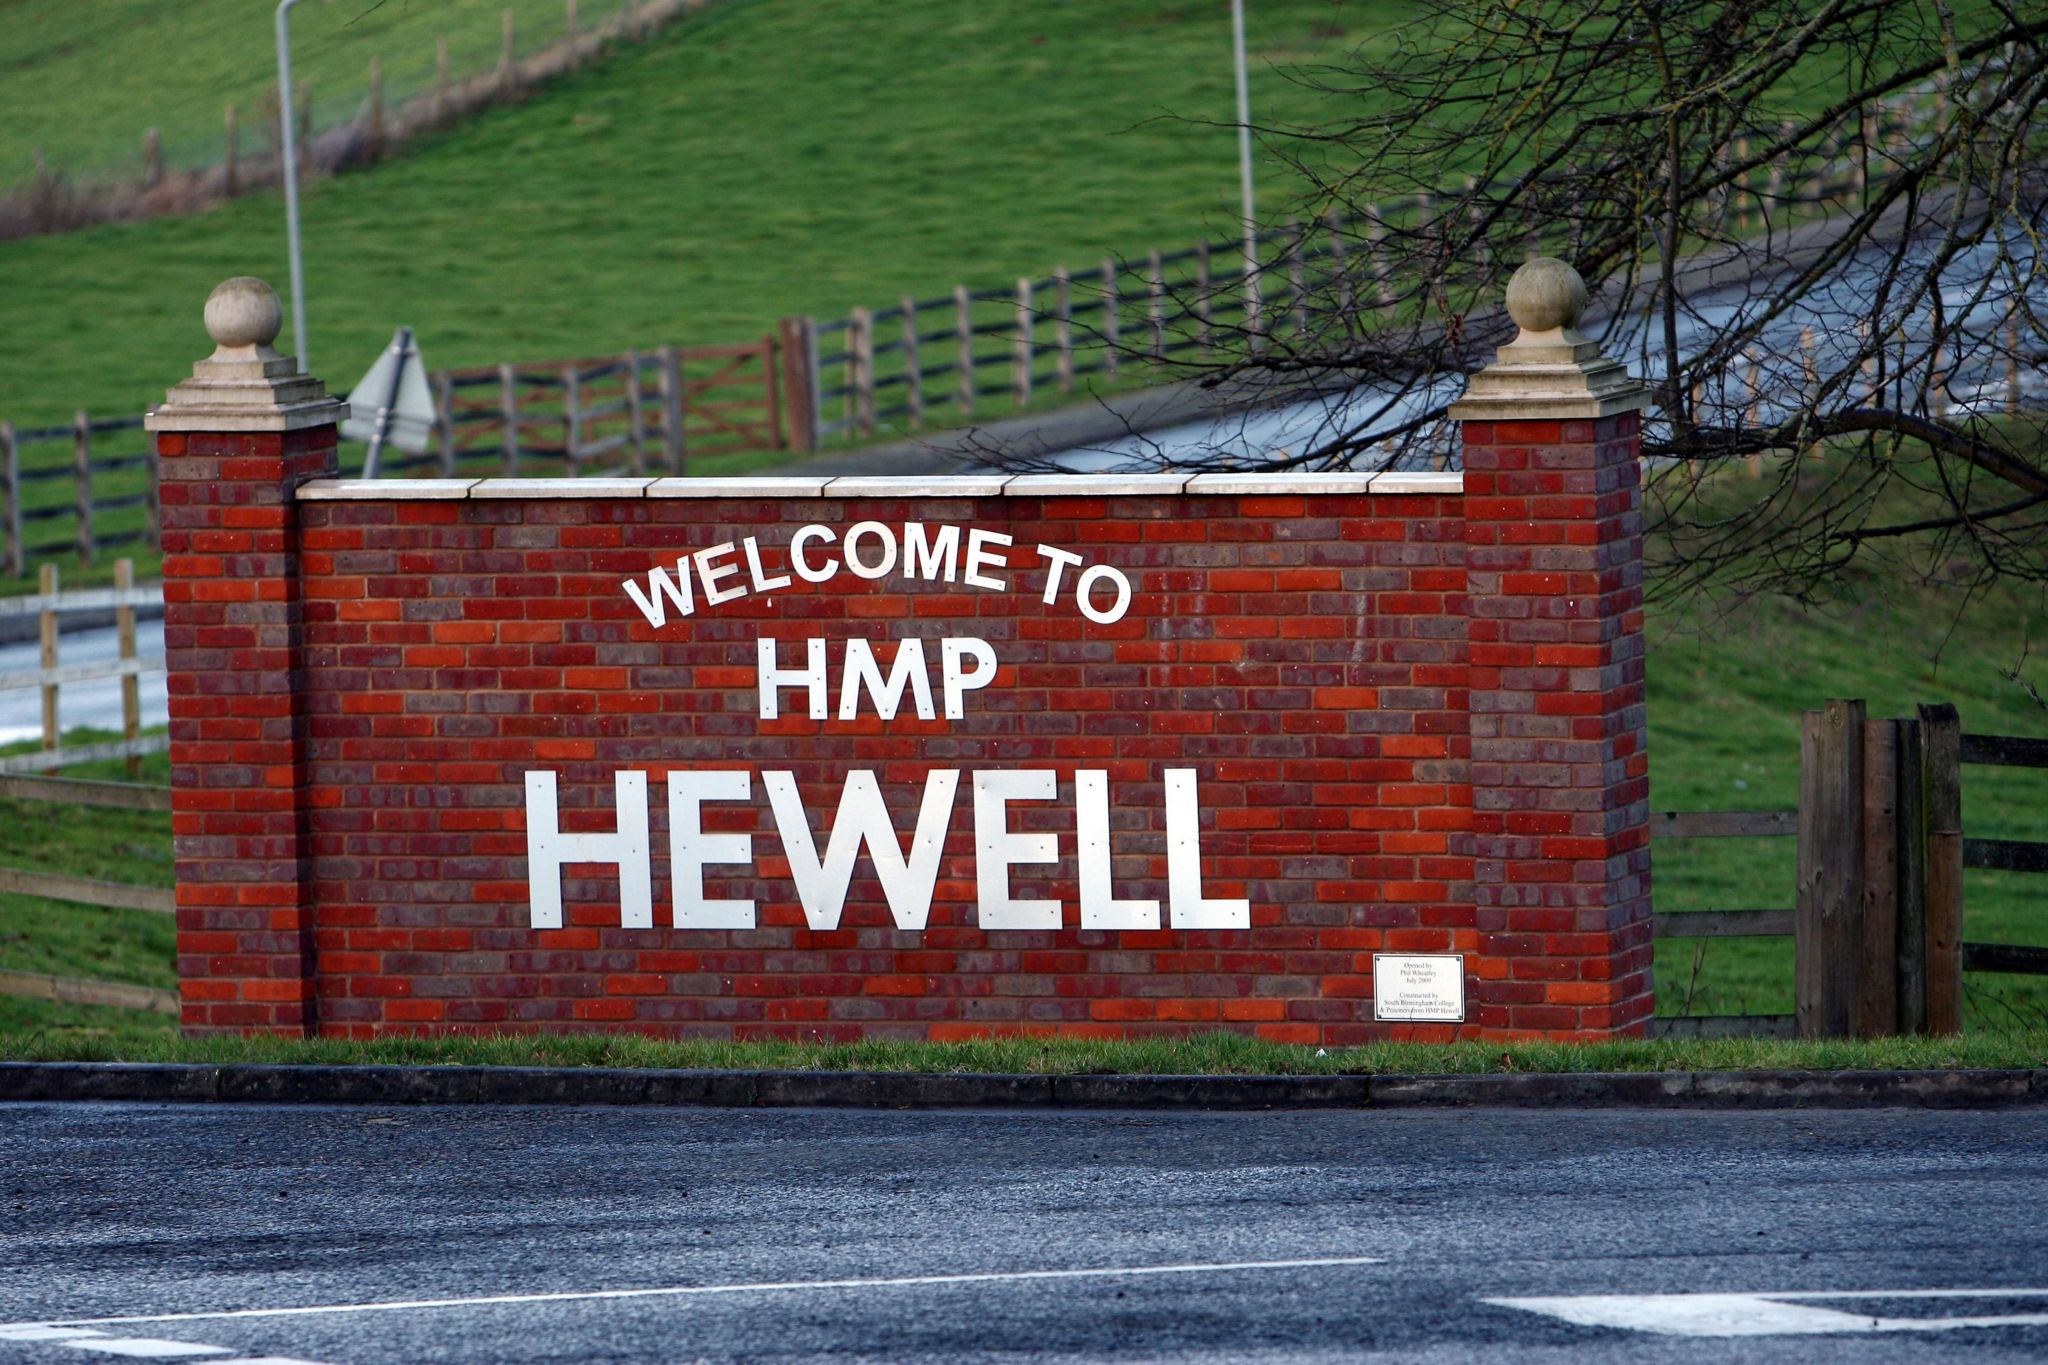 HMP is a category B prison which houses male prisoners. 